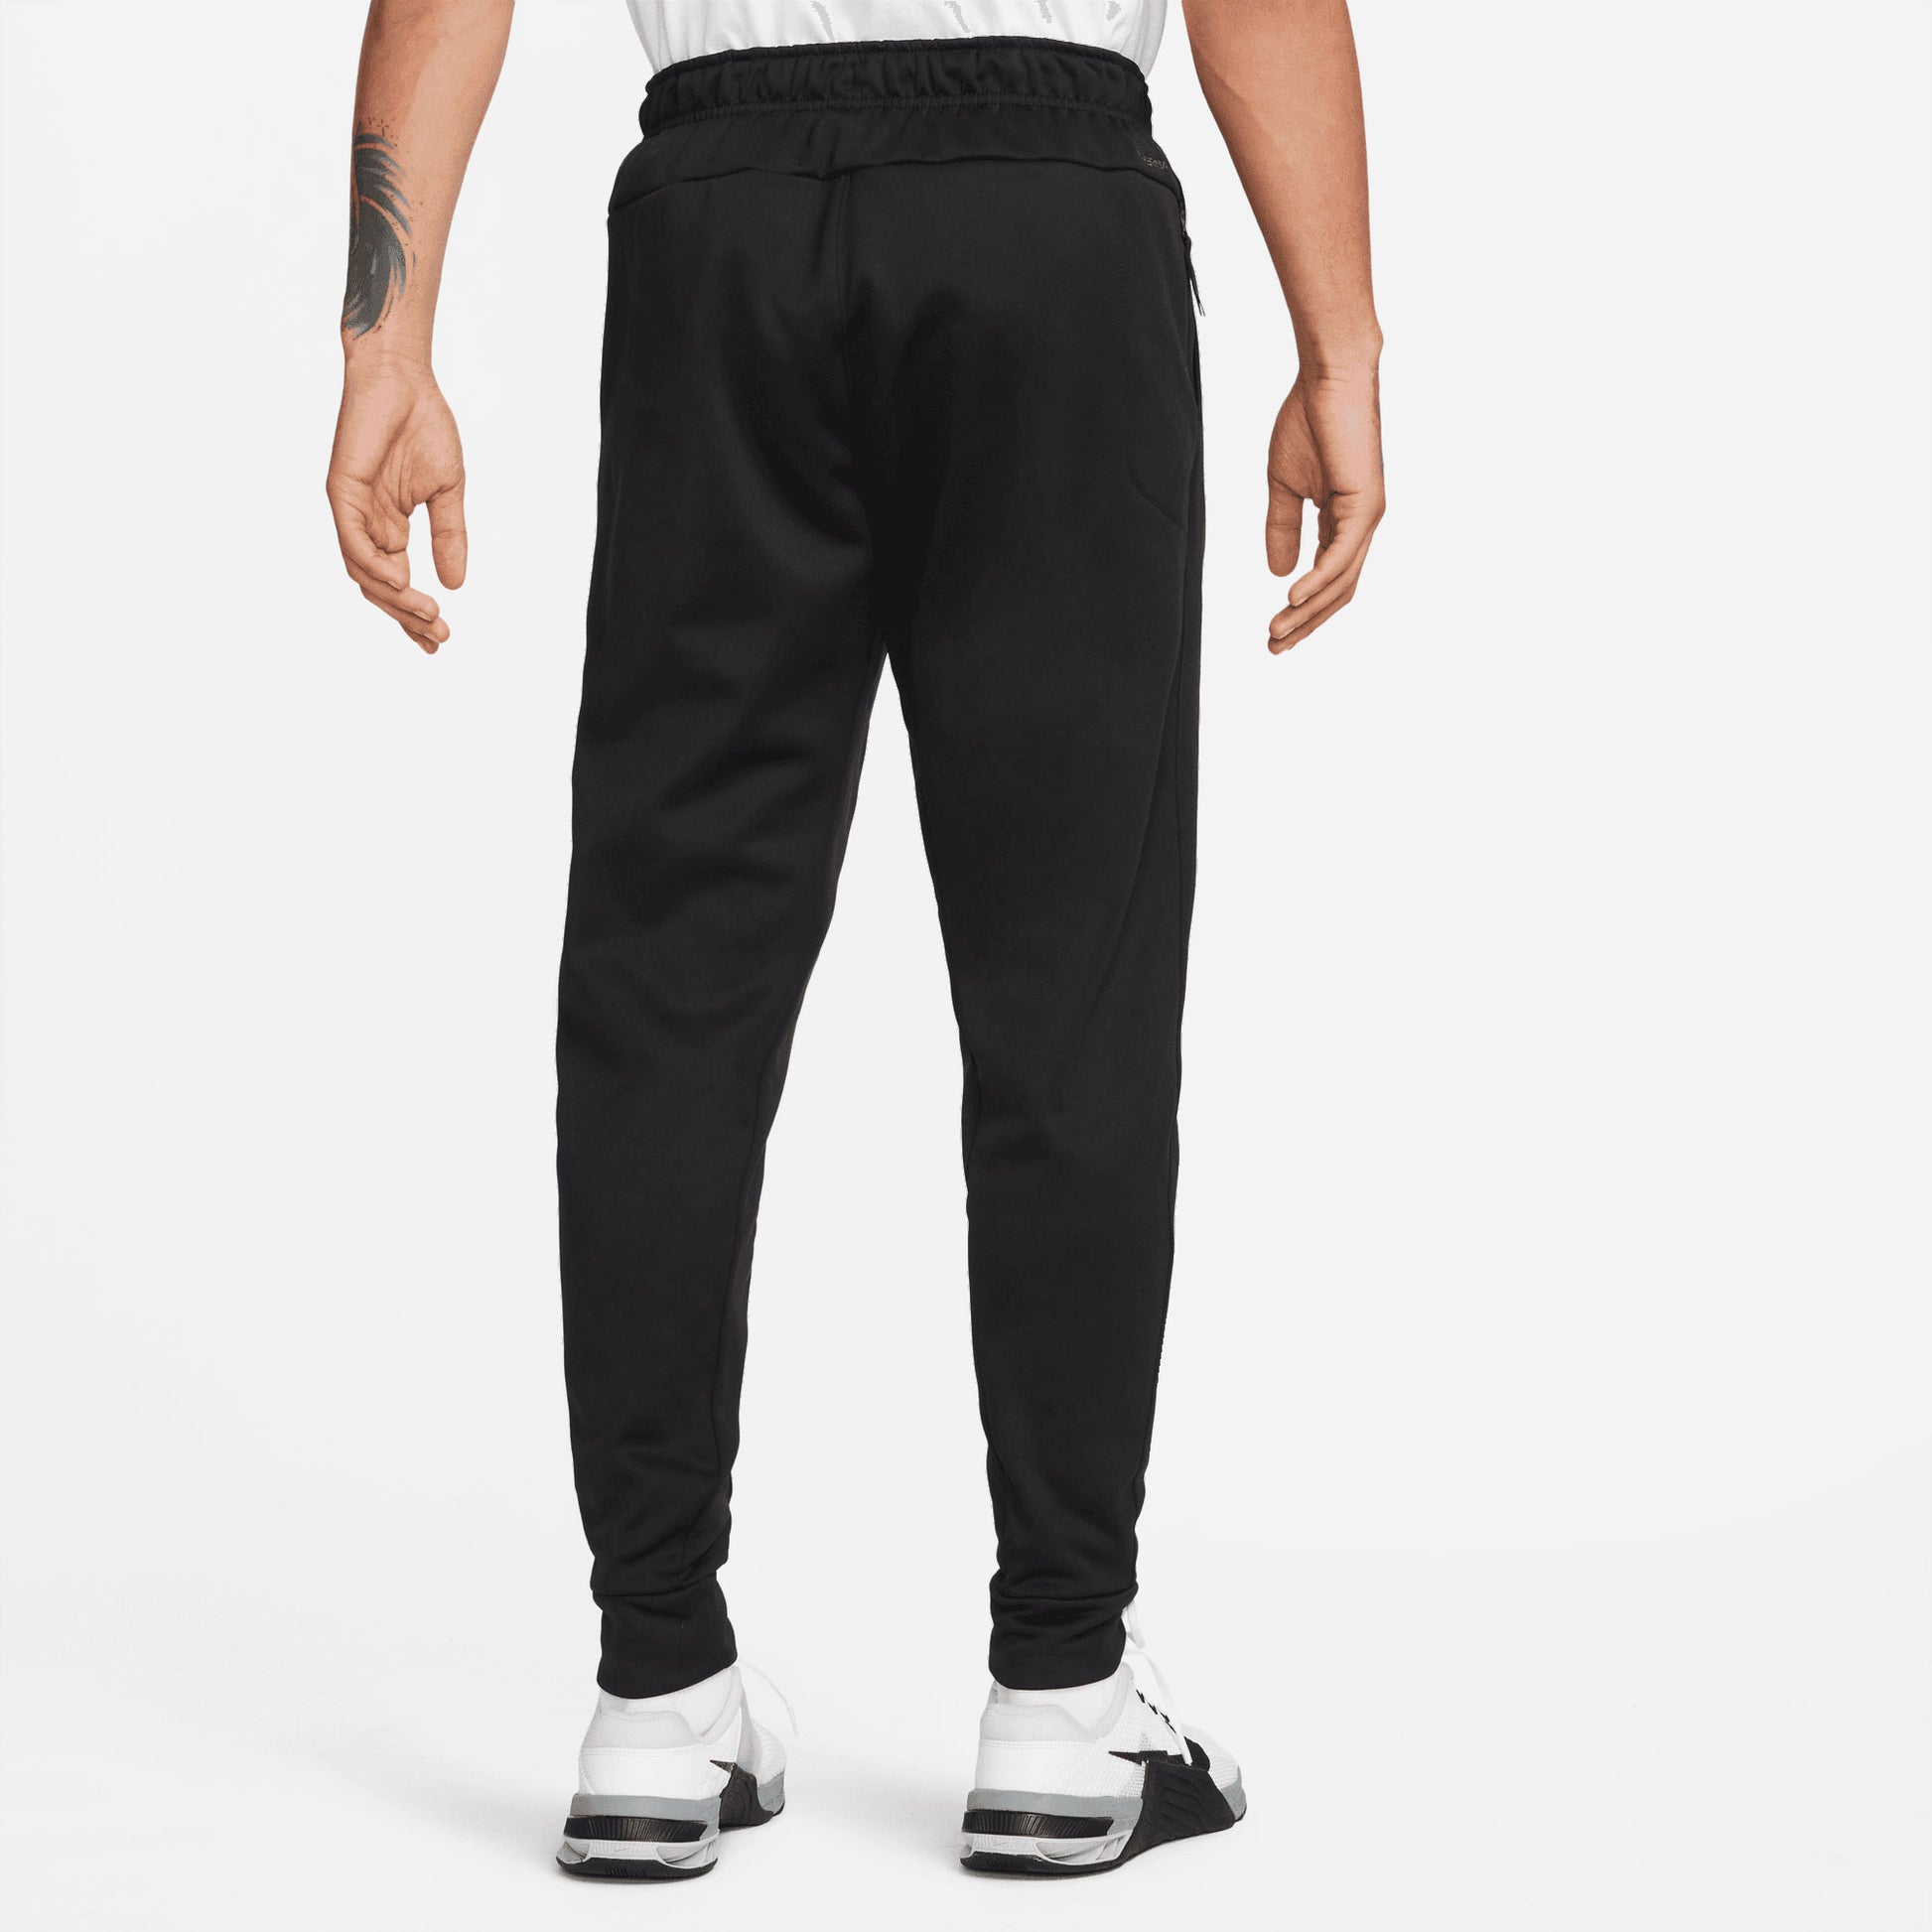 Thema-FIT Men's Tapered Pants – Only